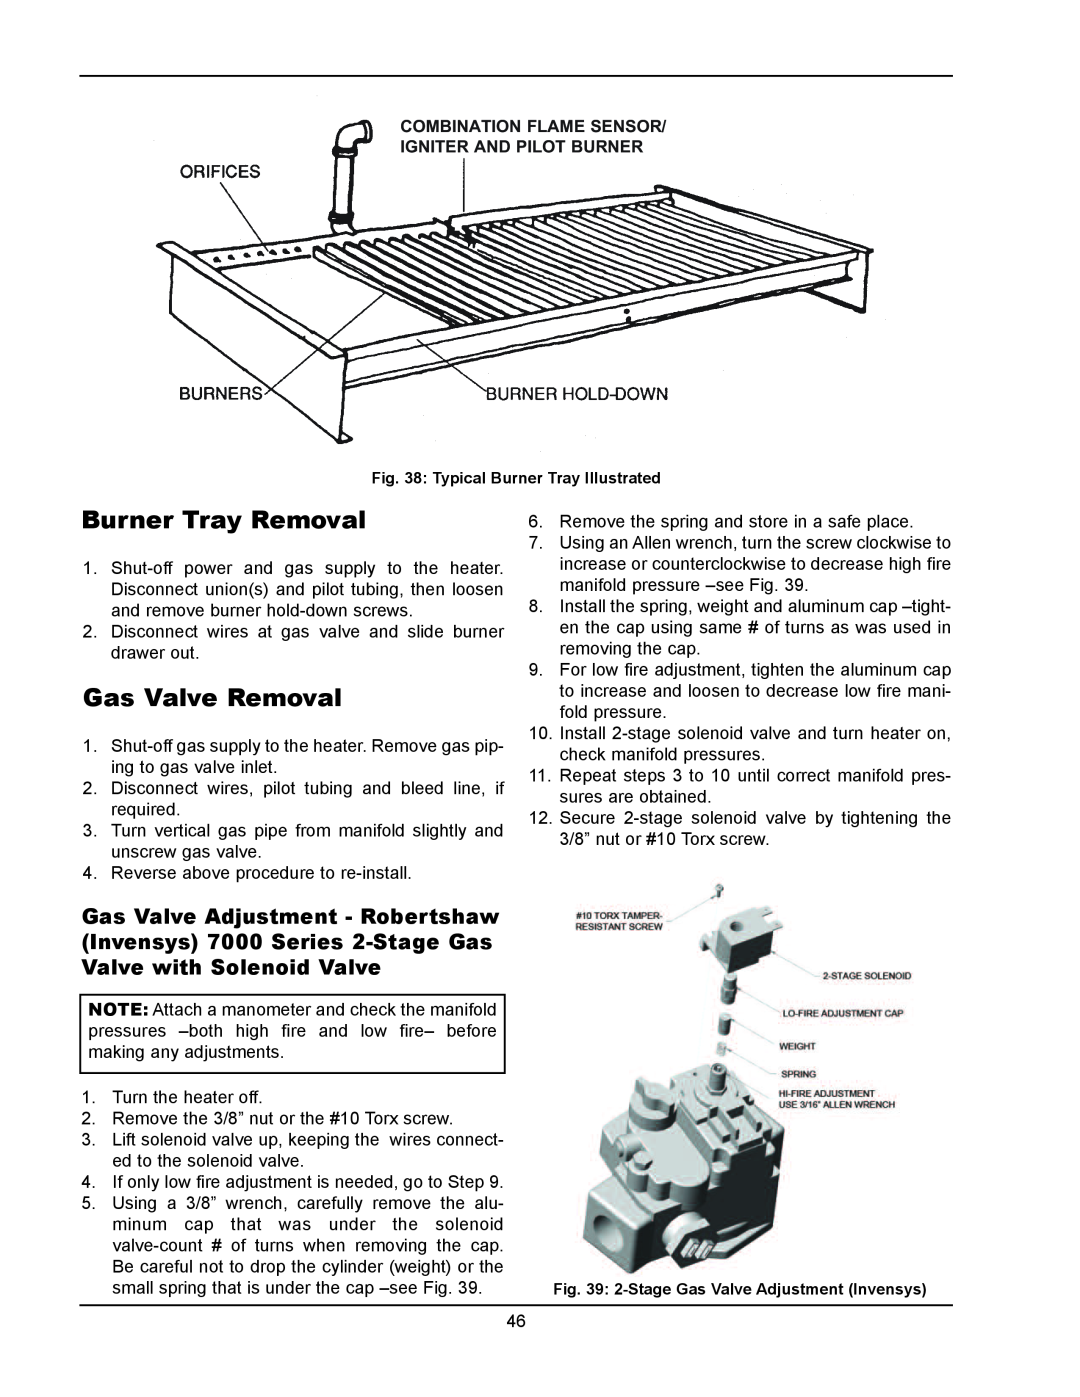 Raypak 1334001 operating instructions burner Tray Removal, Gas Valve Removal, Reverse above procedure to re-install 